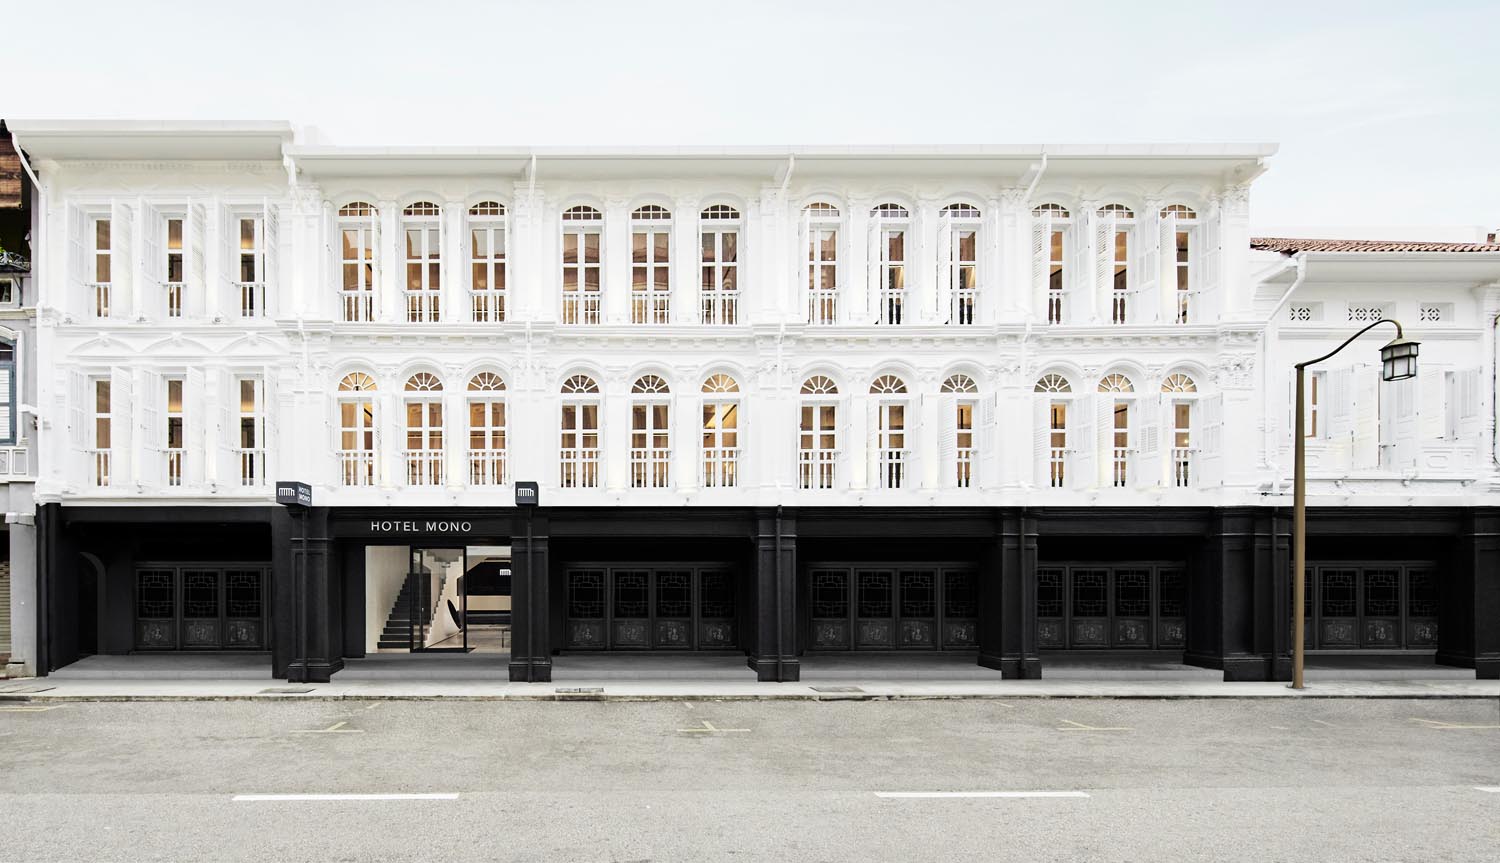 Spacedge Designs Tones Down Heritage Shophouses Renovation into a Black and White Minimalist Hotel